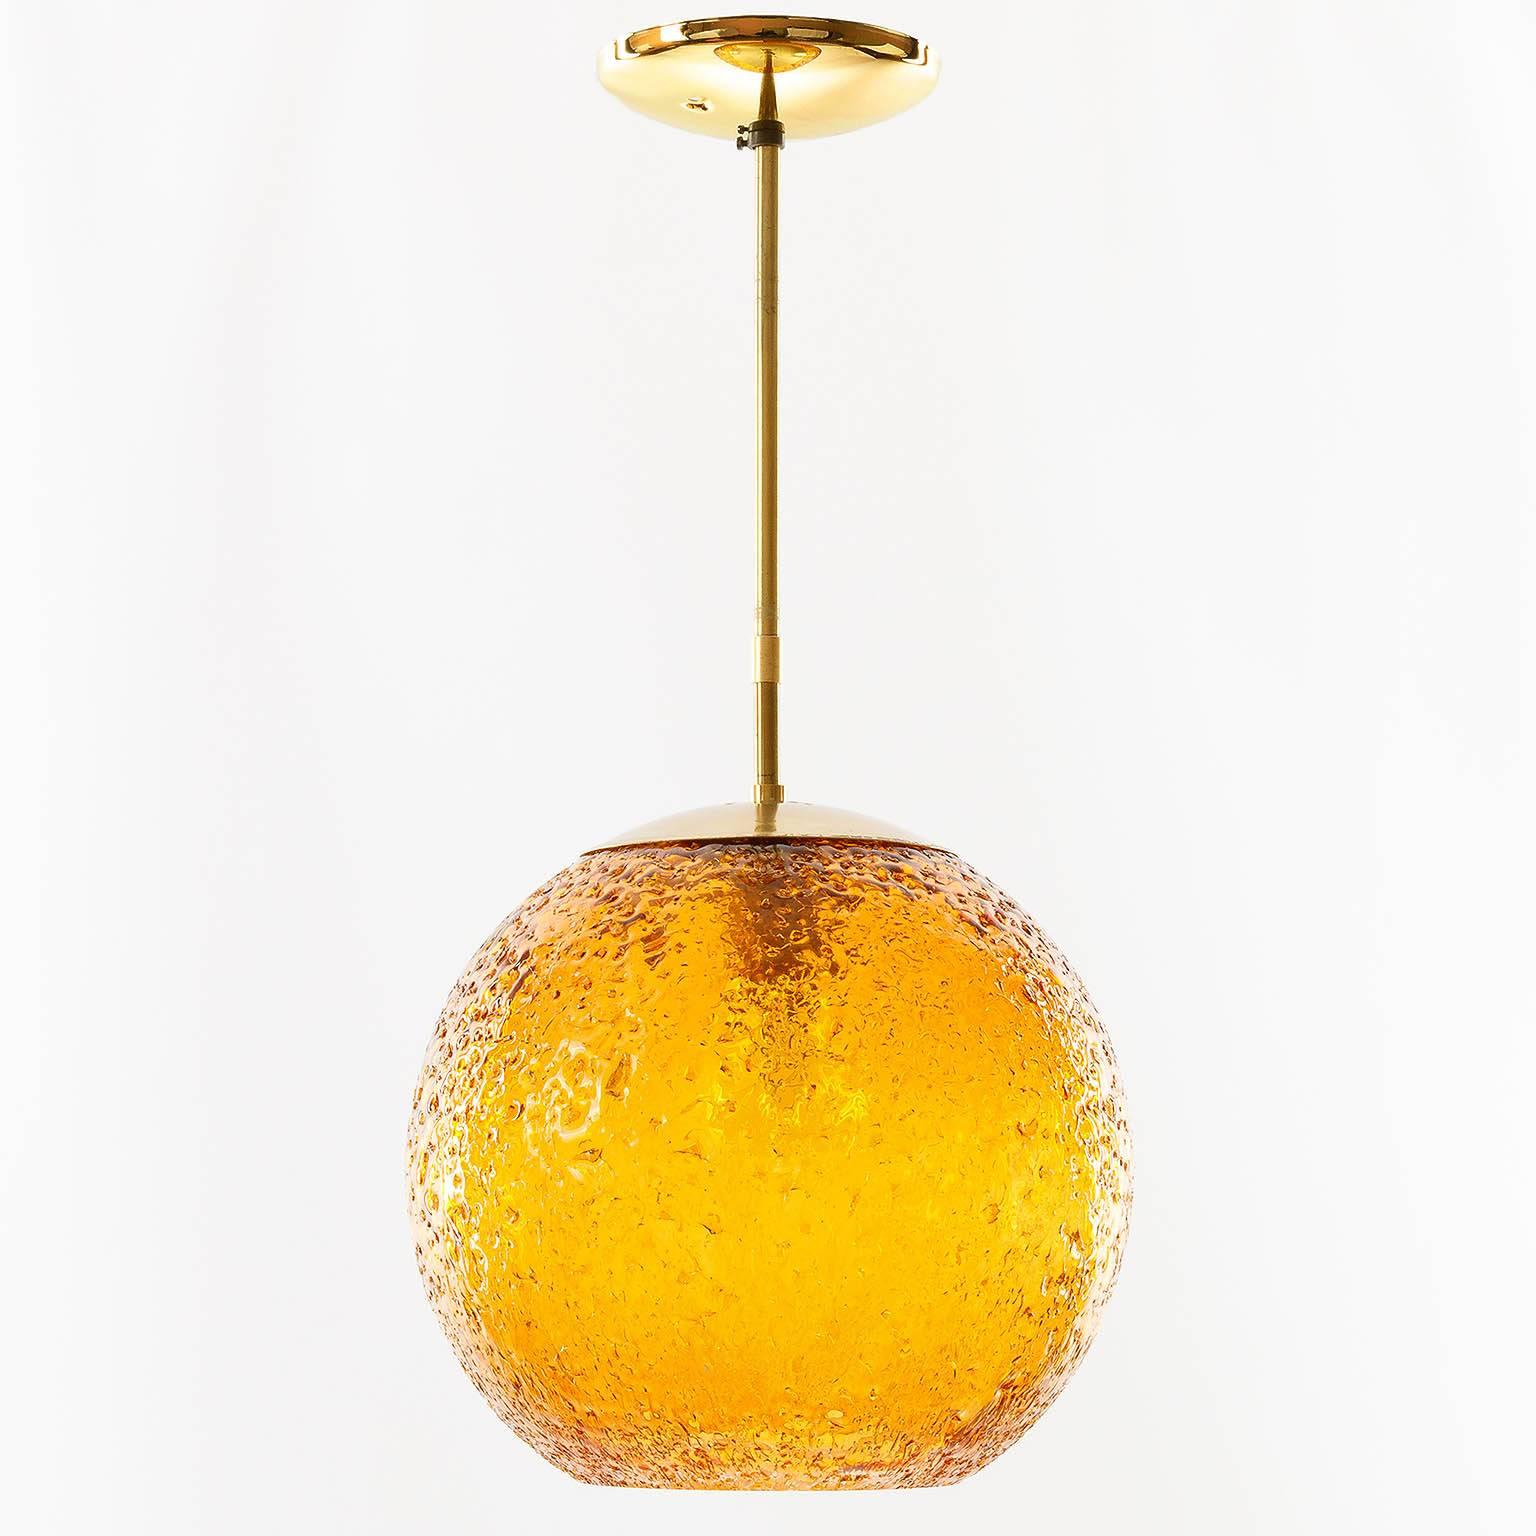 An amber tone (almost orange) glass globe pendant light with brass hardware. Produced in Germany in the 1970s. Very nice textured surface in a rich and warm color. One medium base bulb.
Current total drop: 20 inch.

Price reduced from $1200.